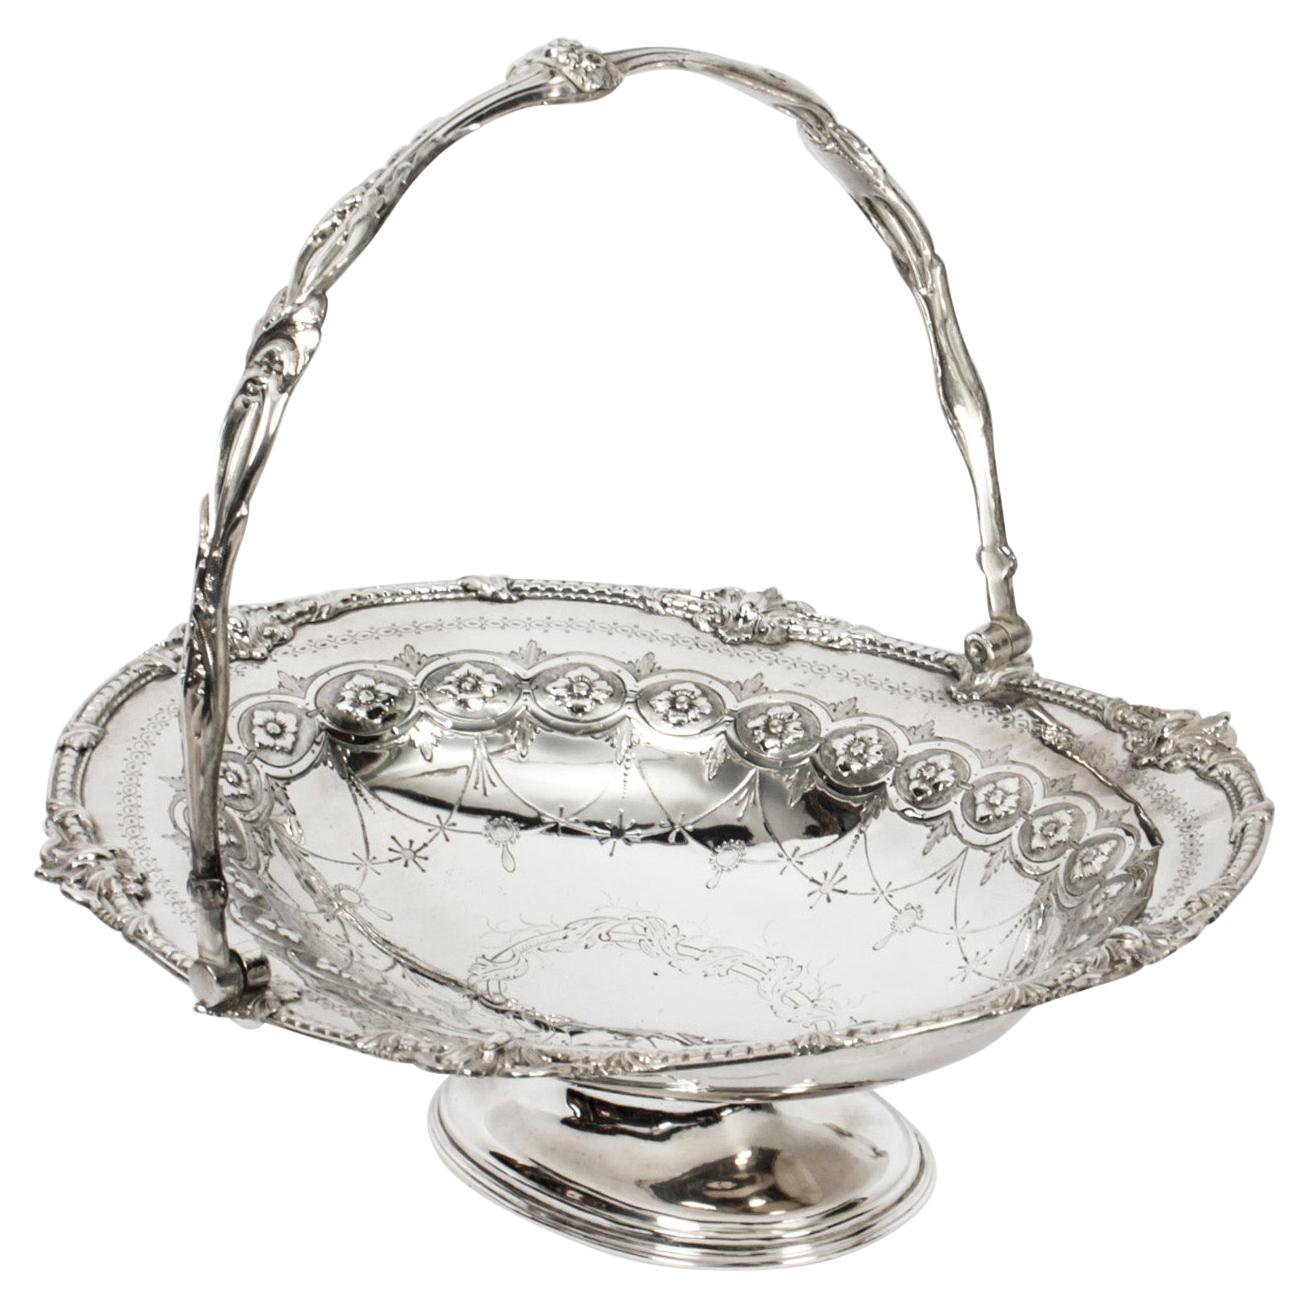 Antique Silver Plated Fruit Basket by Henry Atkins & Co 19th C